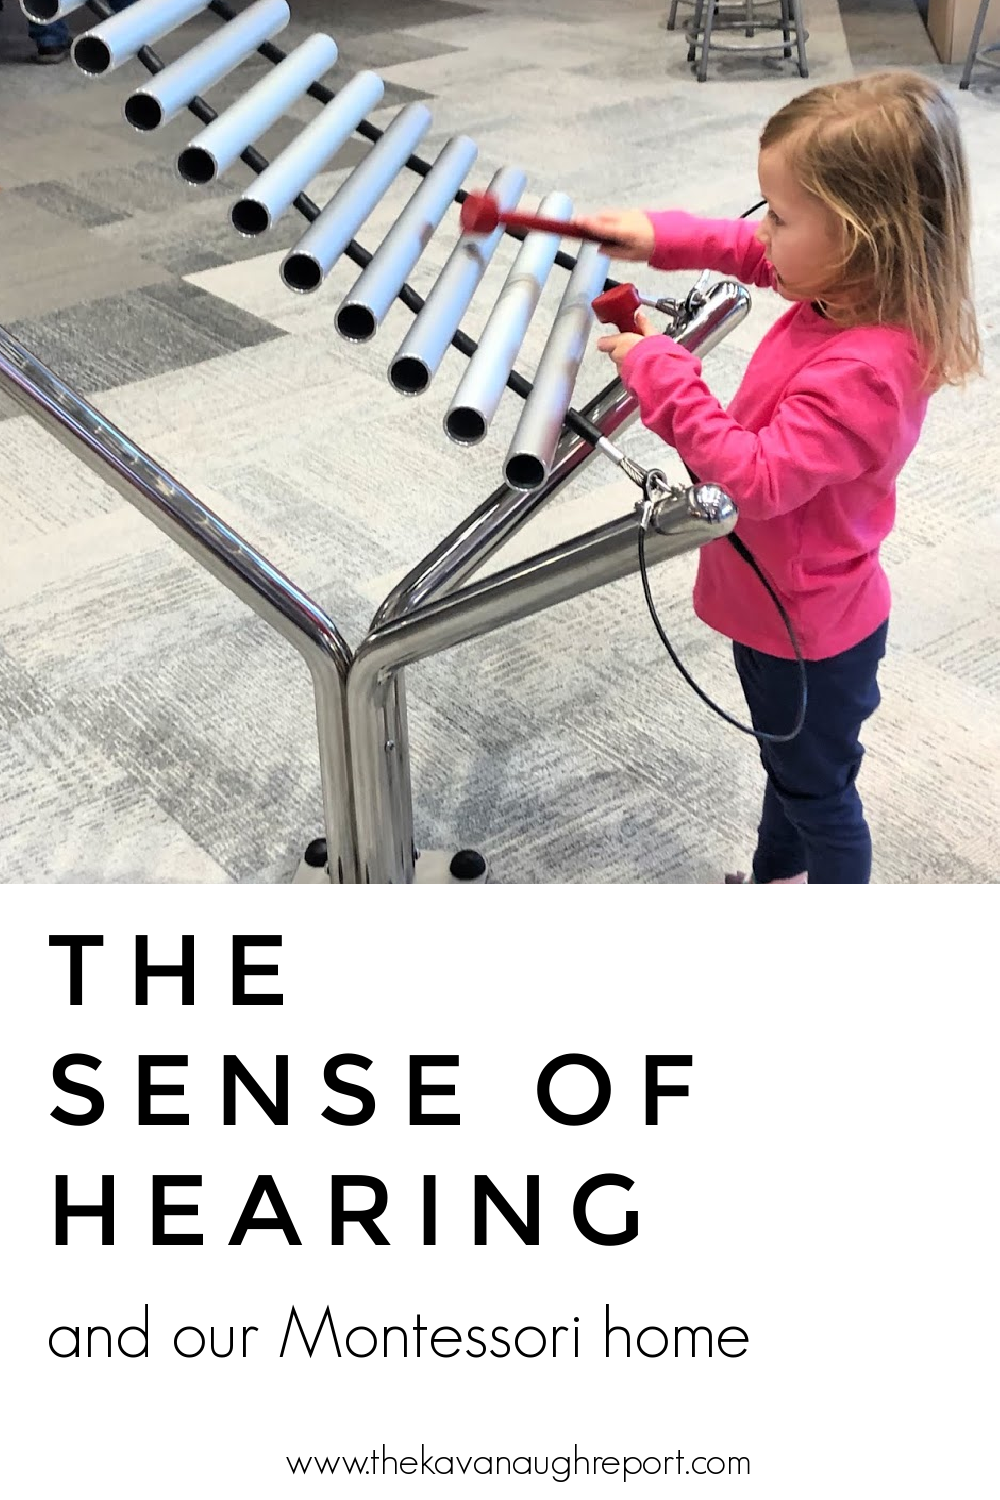 Montessori ideas for developing the sense of hearing - and why it is important - including activities for babies, toddles to try at home.